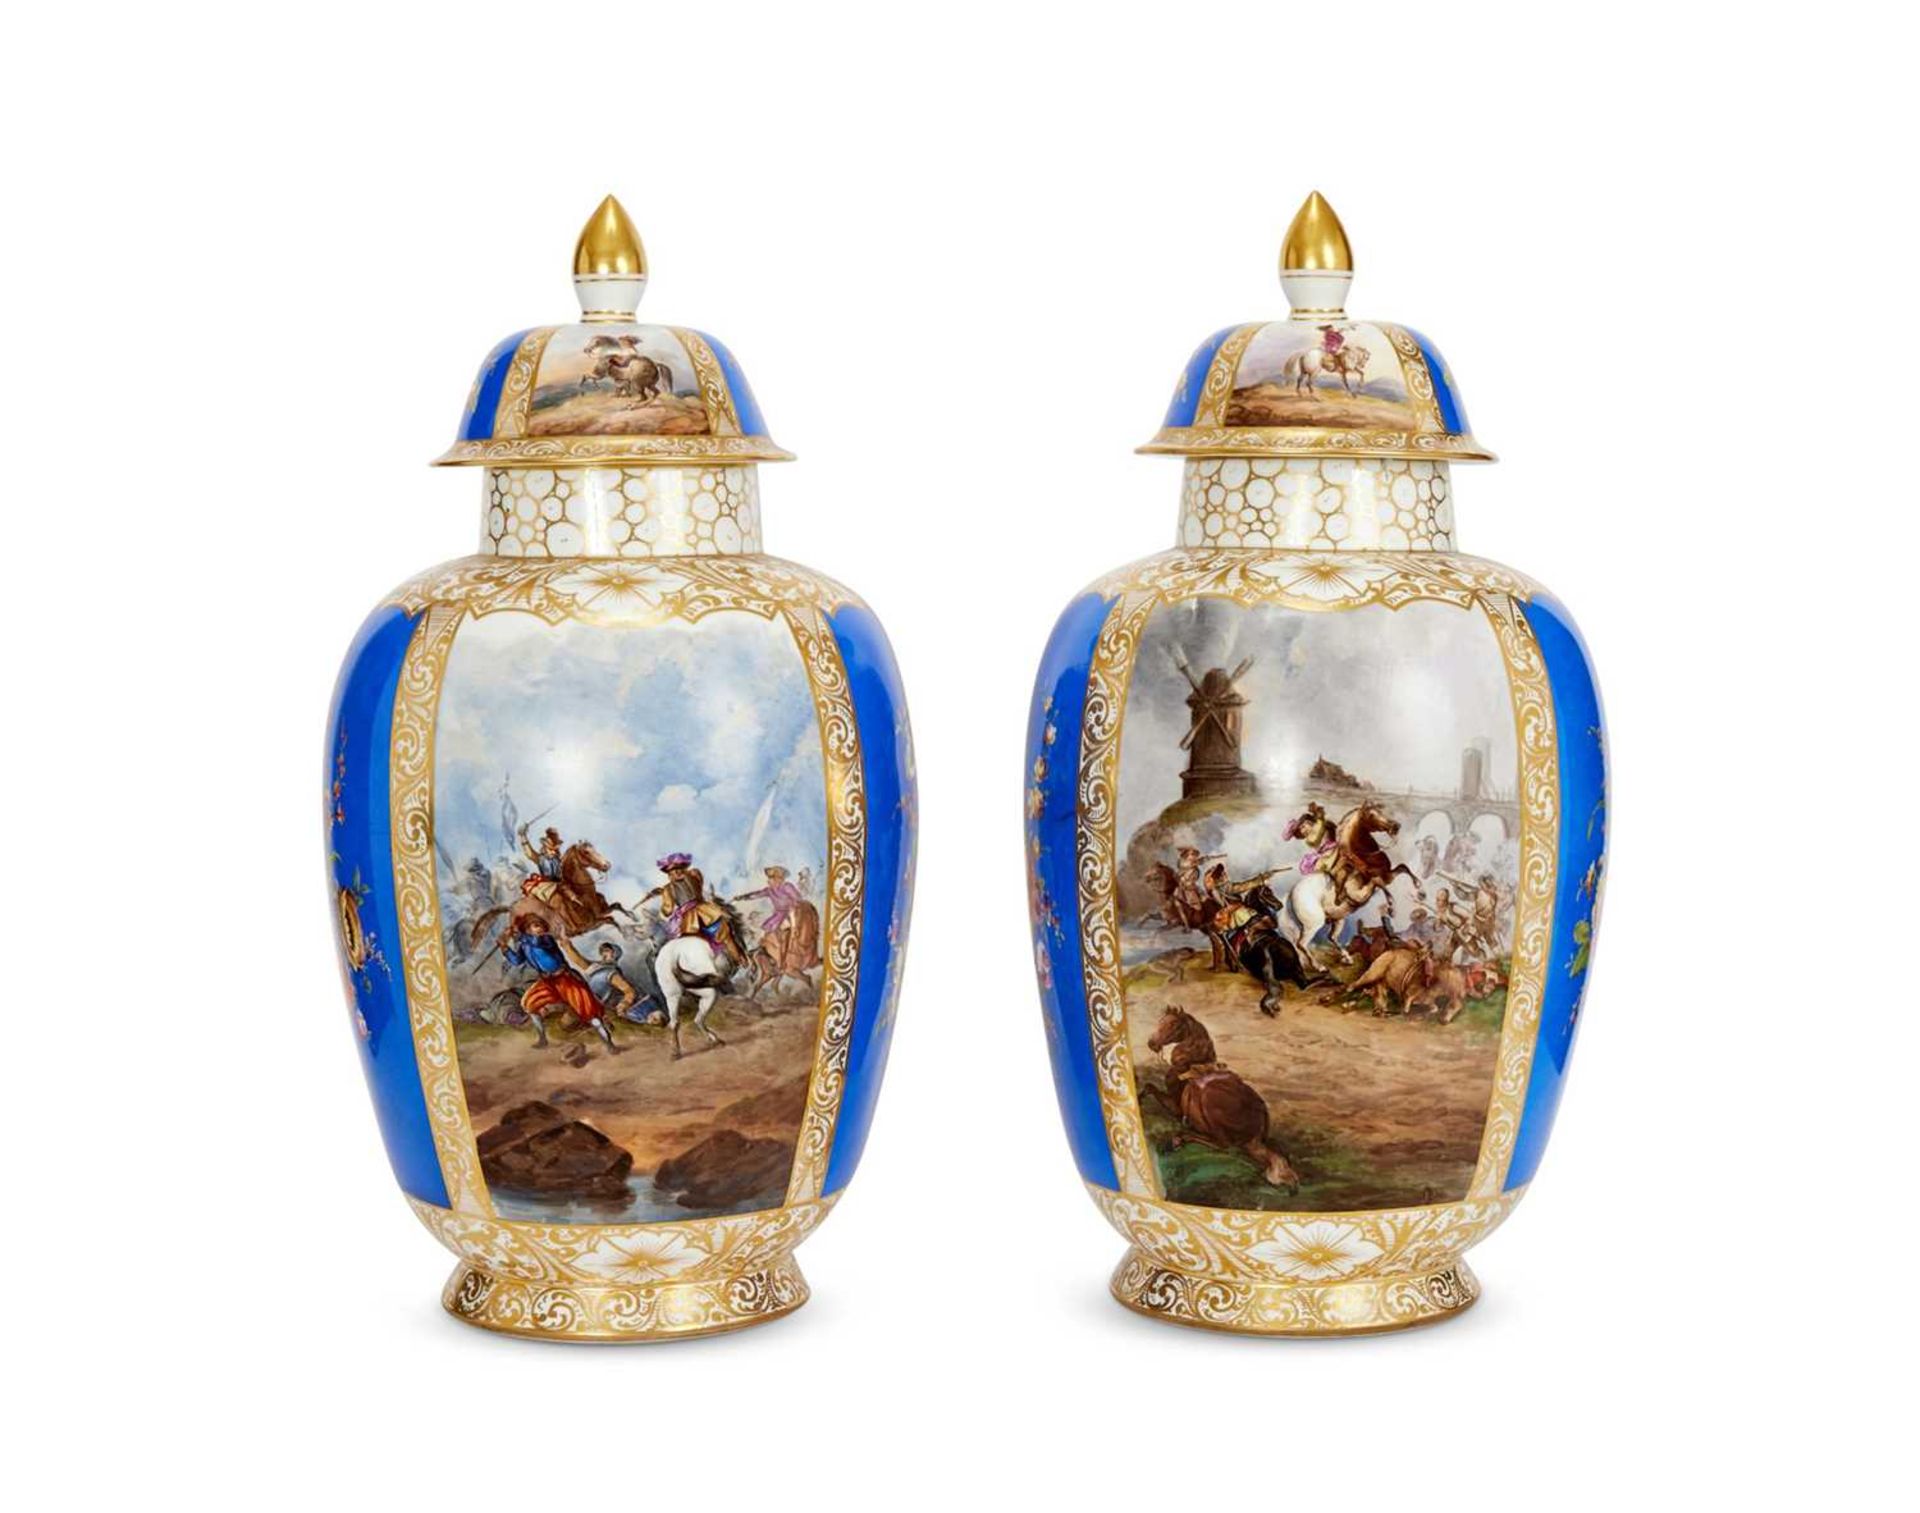 A LARGE PAIR OF 19TH CENTURY DRESDEN AUGUSTUS REX PORCELAIN VASES OF EQUESTRIAN THEME - Image 2 of 2